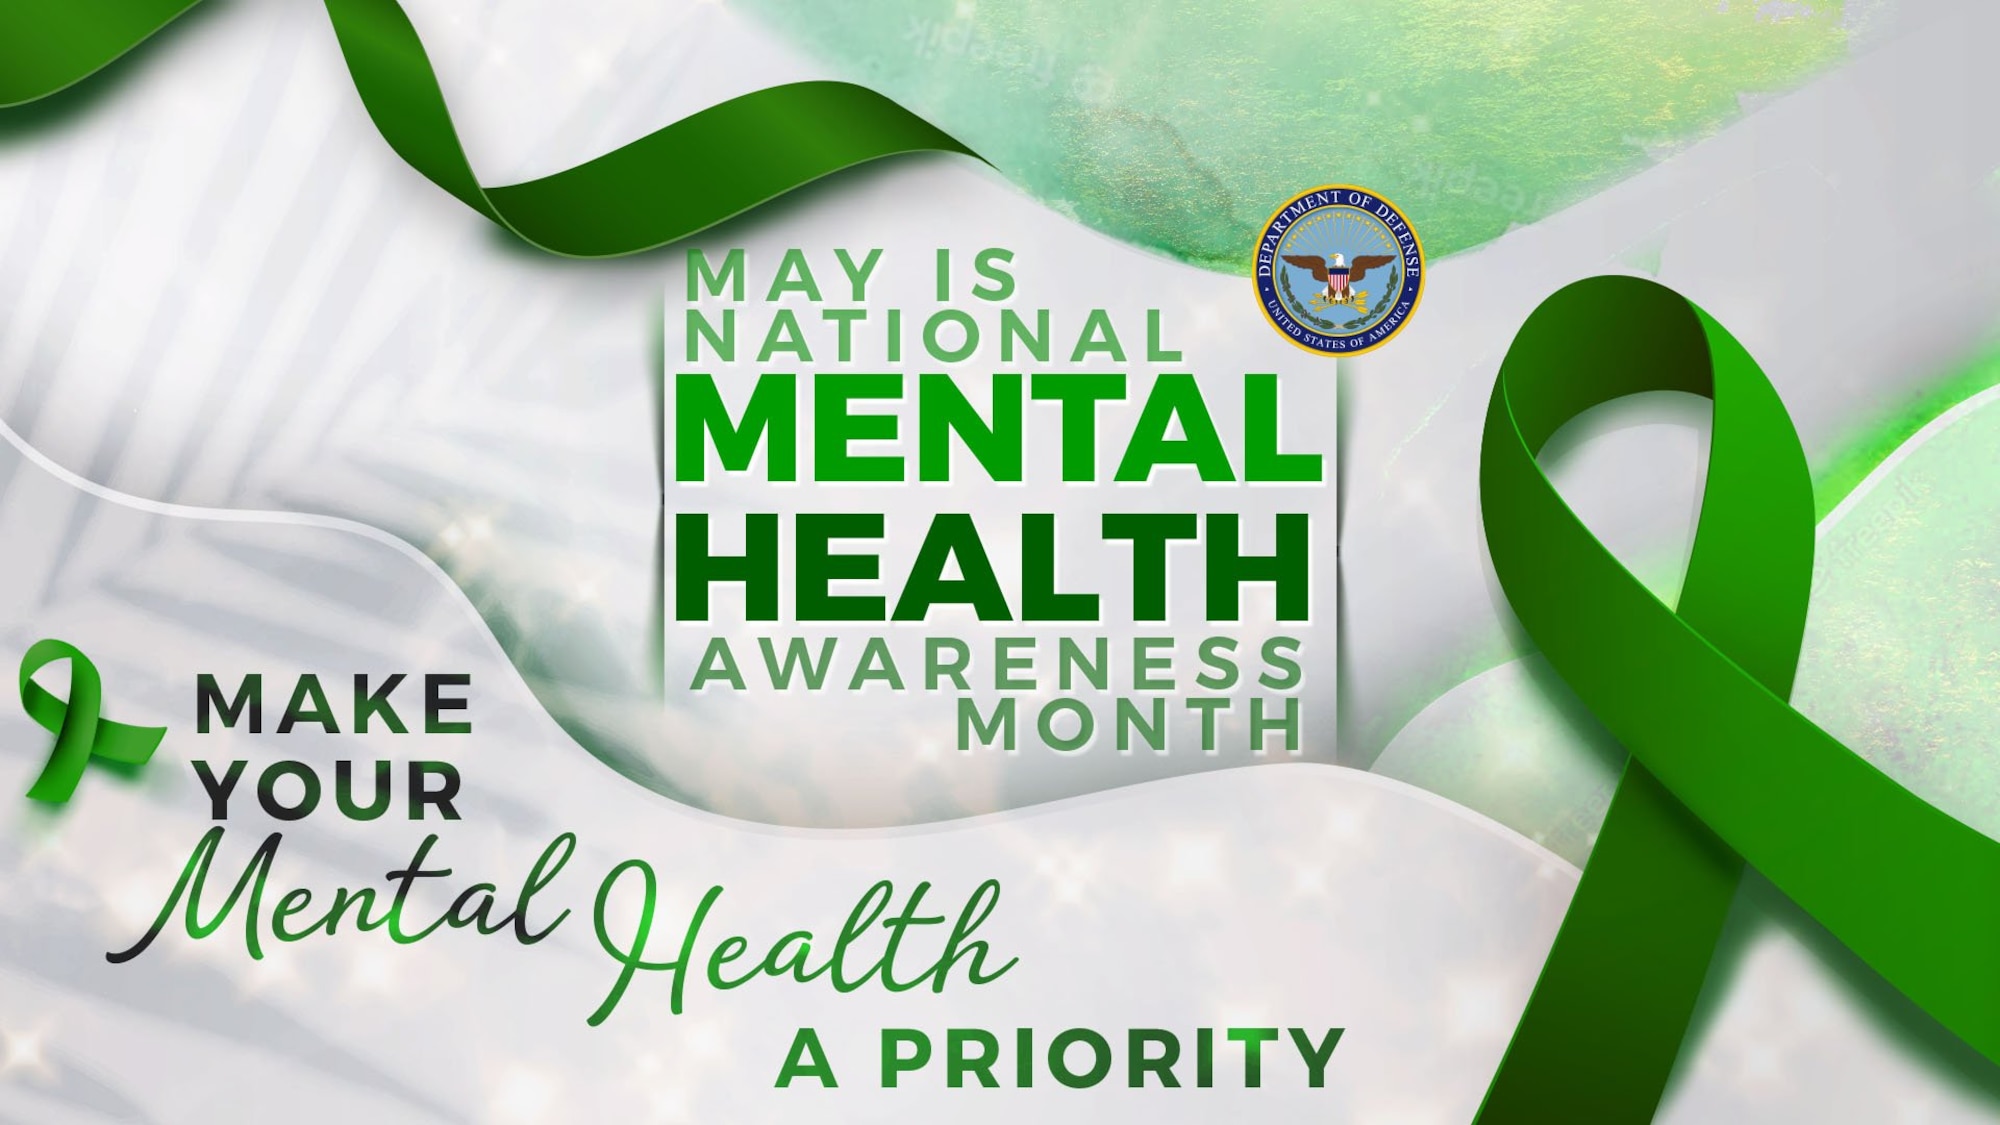 A Defense Department seal and two green ribbons adorn words related to mental health awareness month.